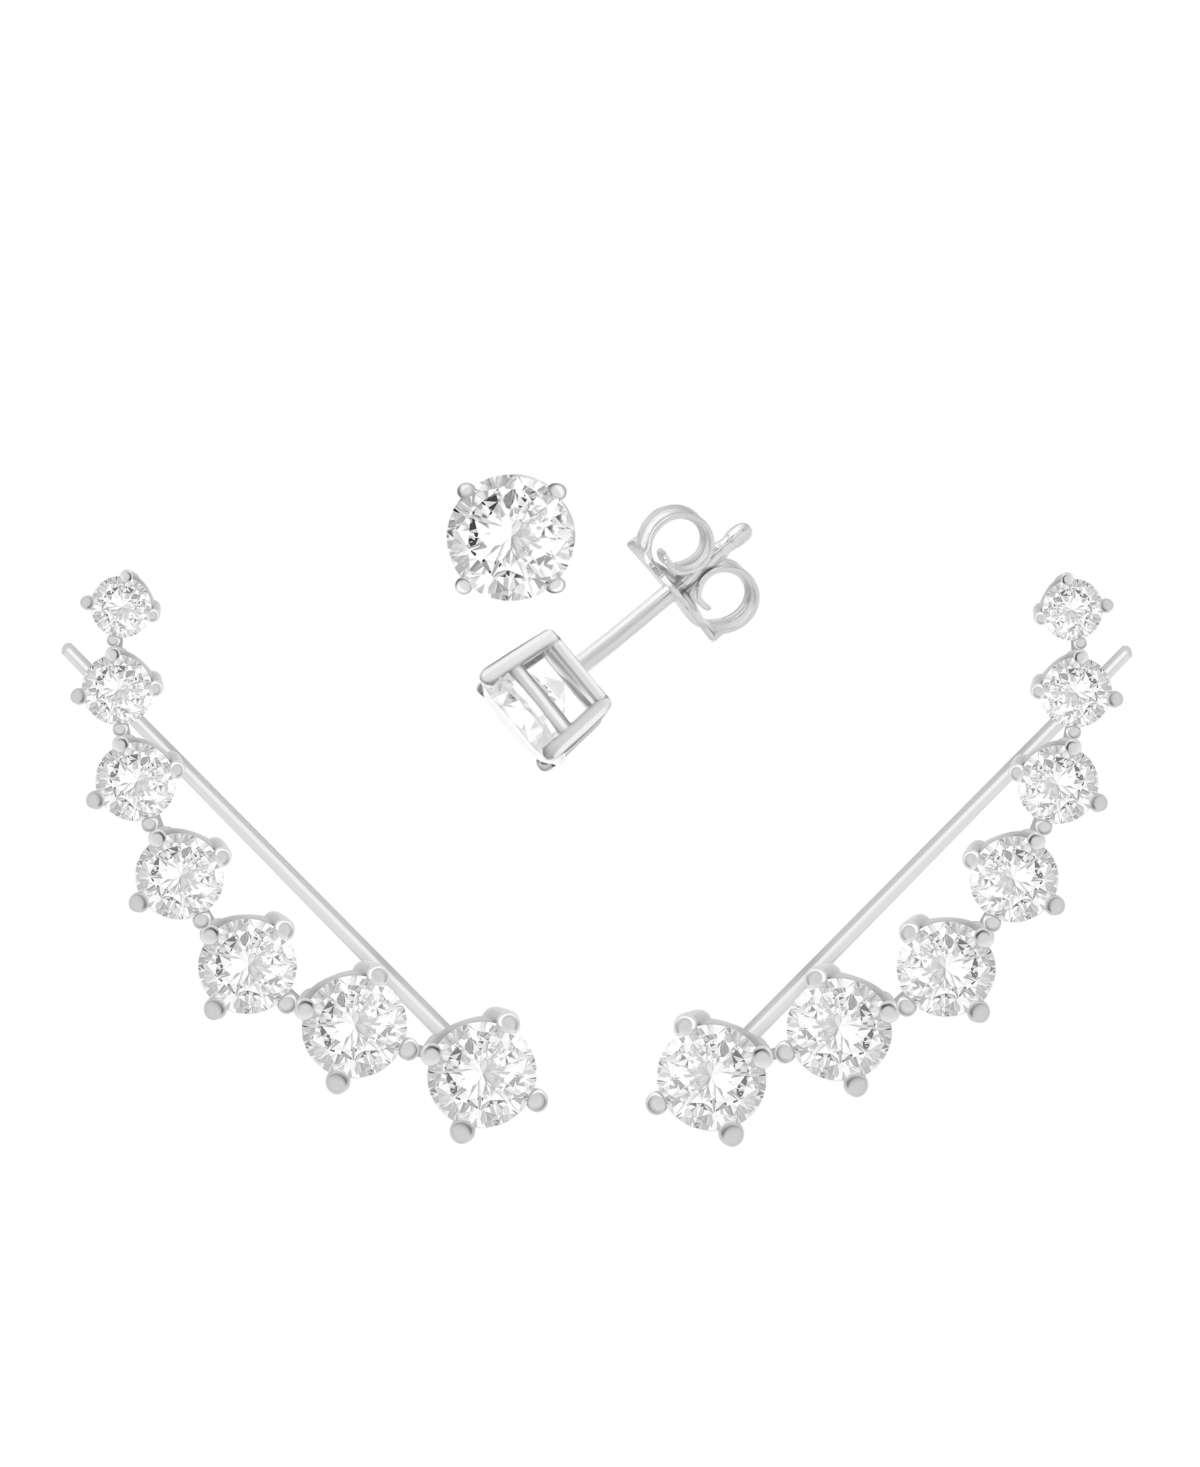 Cubic Zirconia Stud & Graduated Climber Set in Silver Plate or Gold Plate - Silver